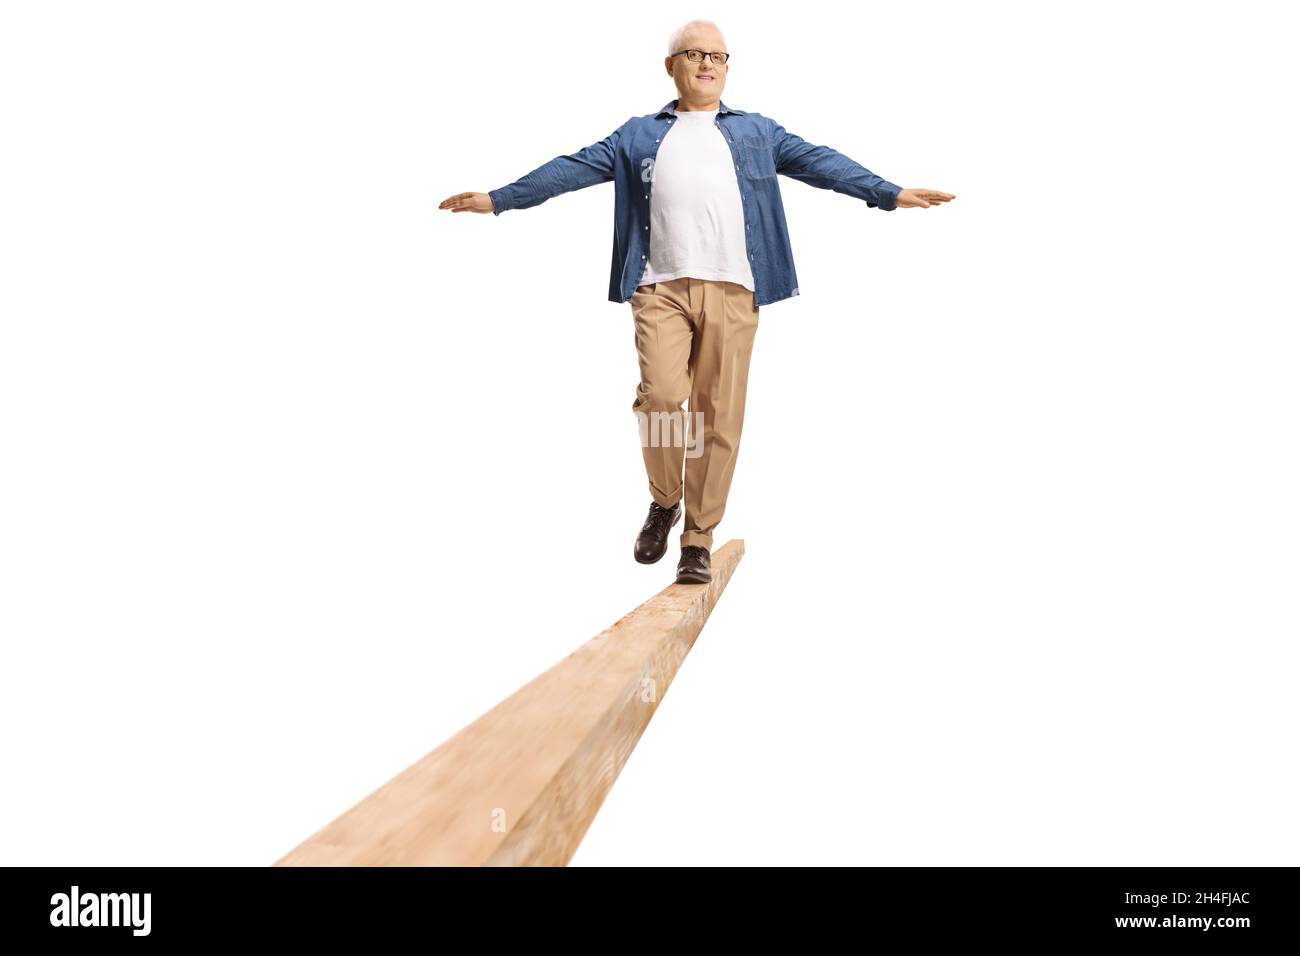 Full length shot of a mature man with white hair walking on beam isolated on white background Stock Photo